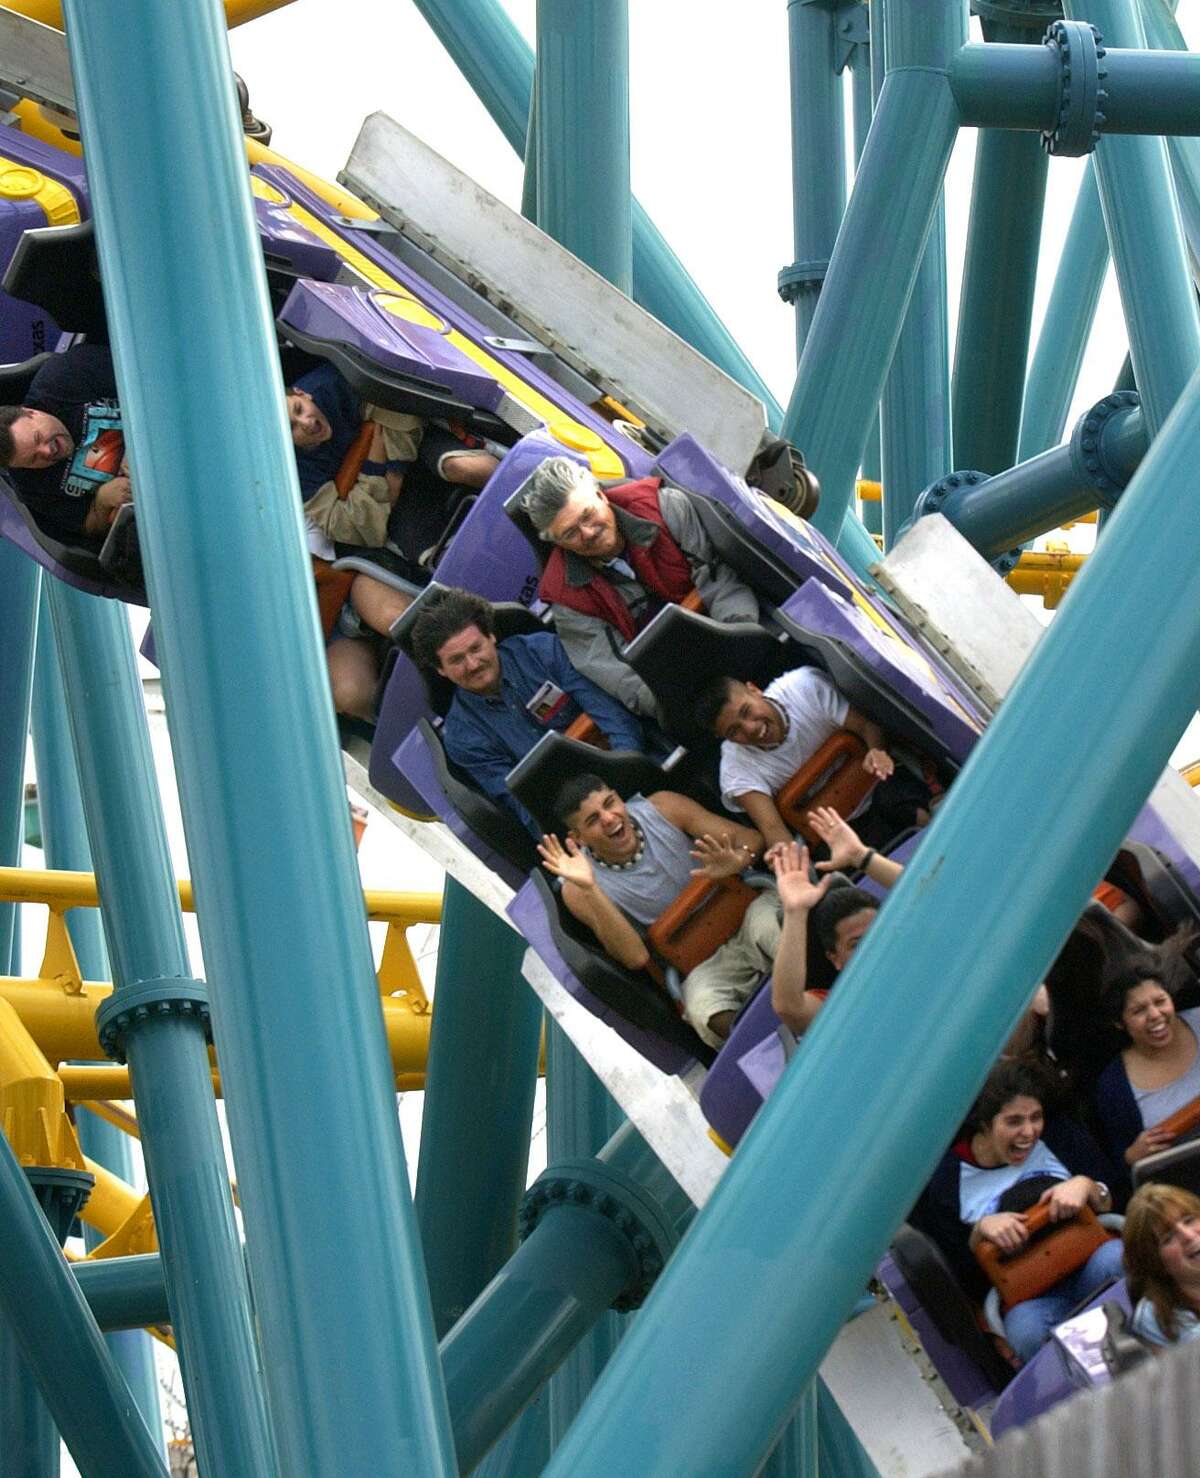 People ride the Poltergeist roller coaster in this 2003 photo.